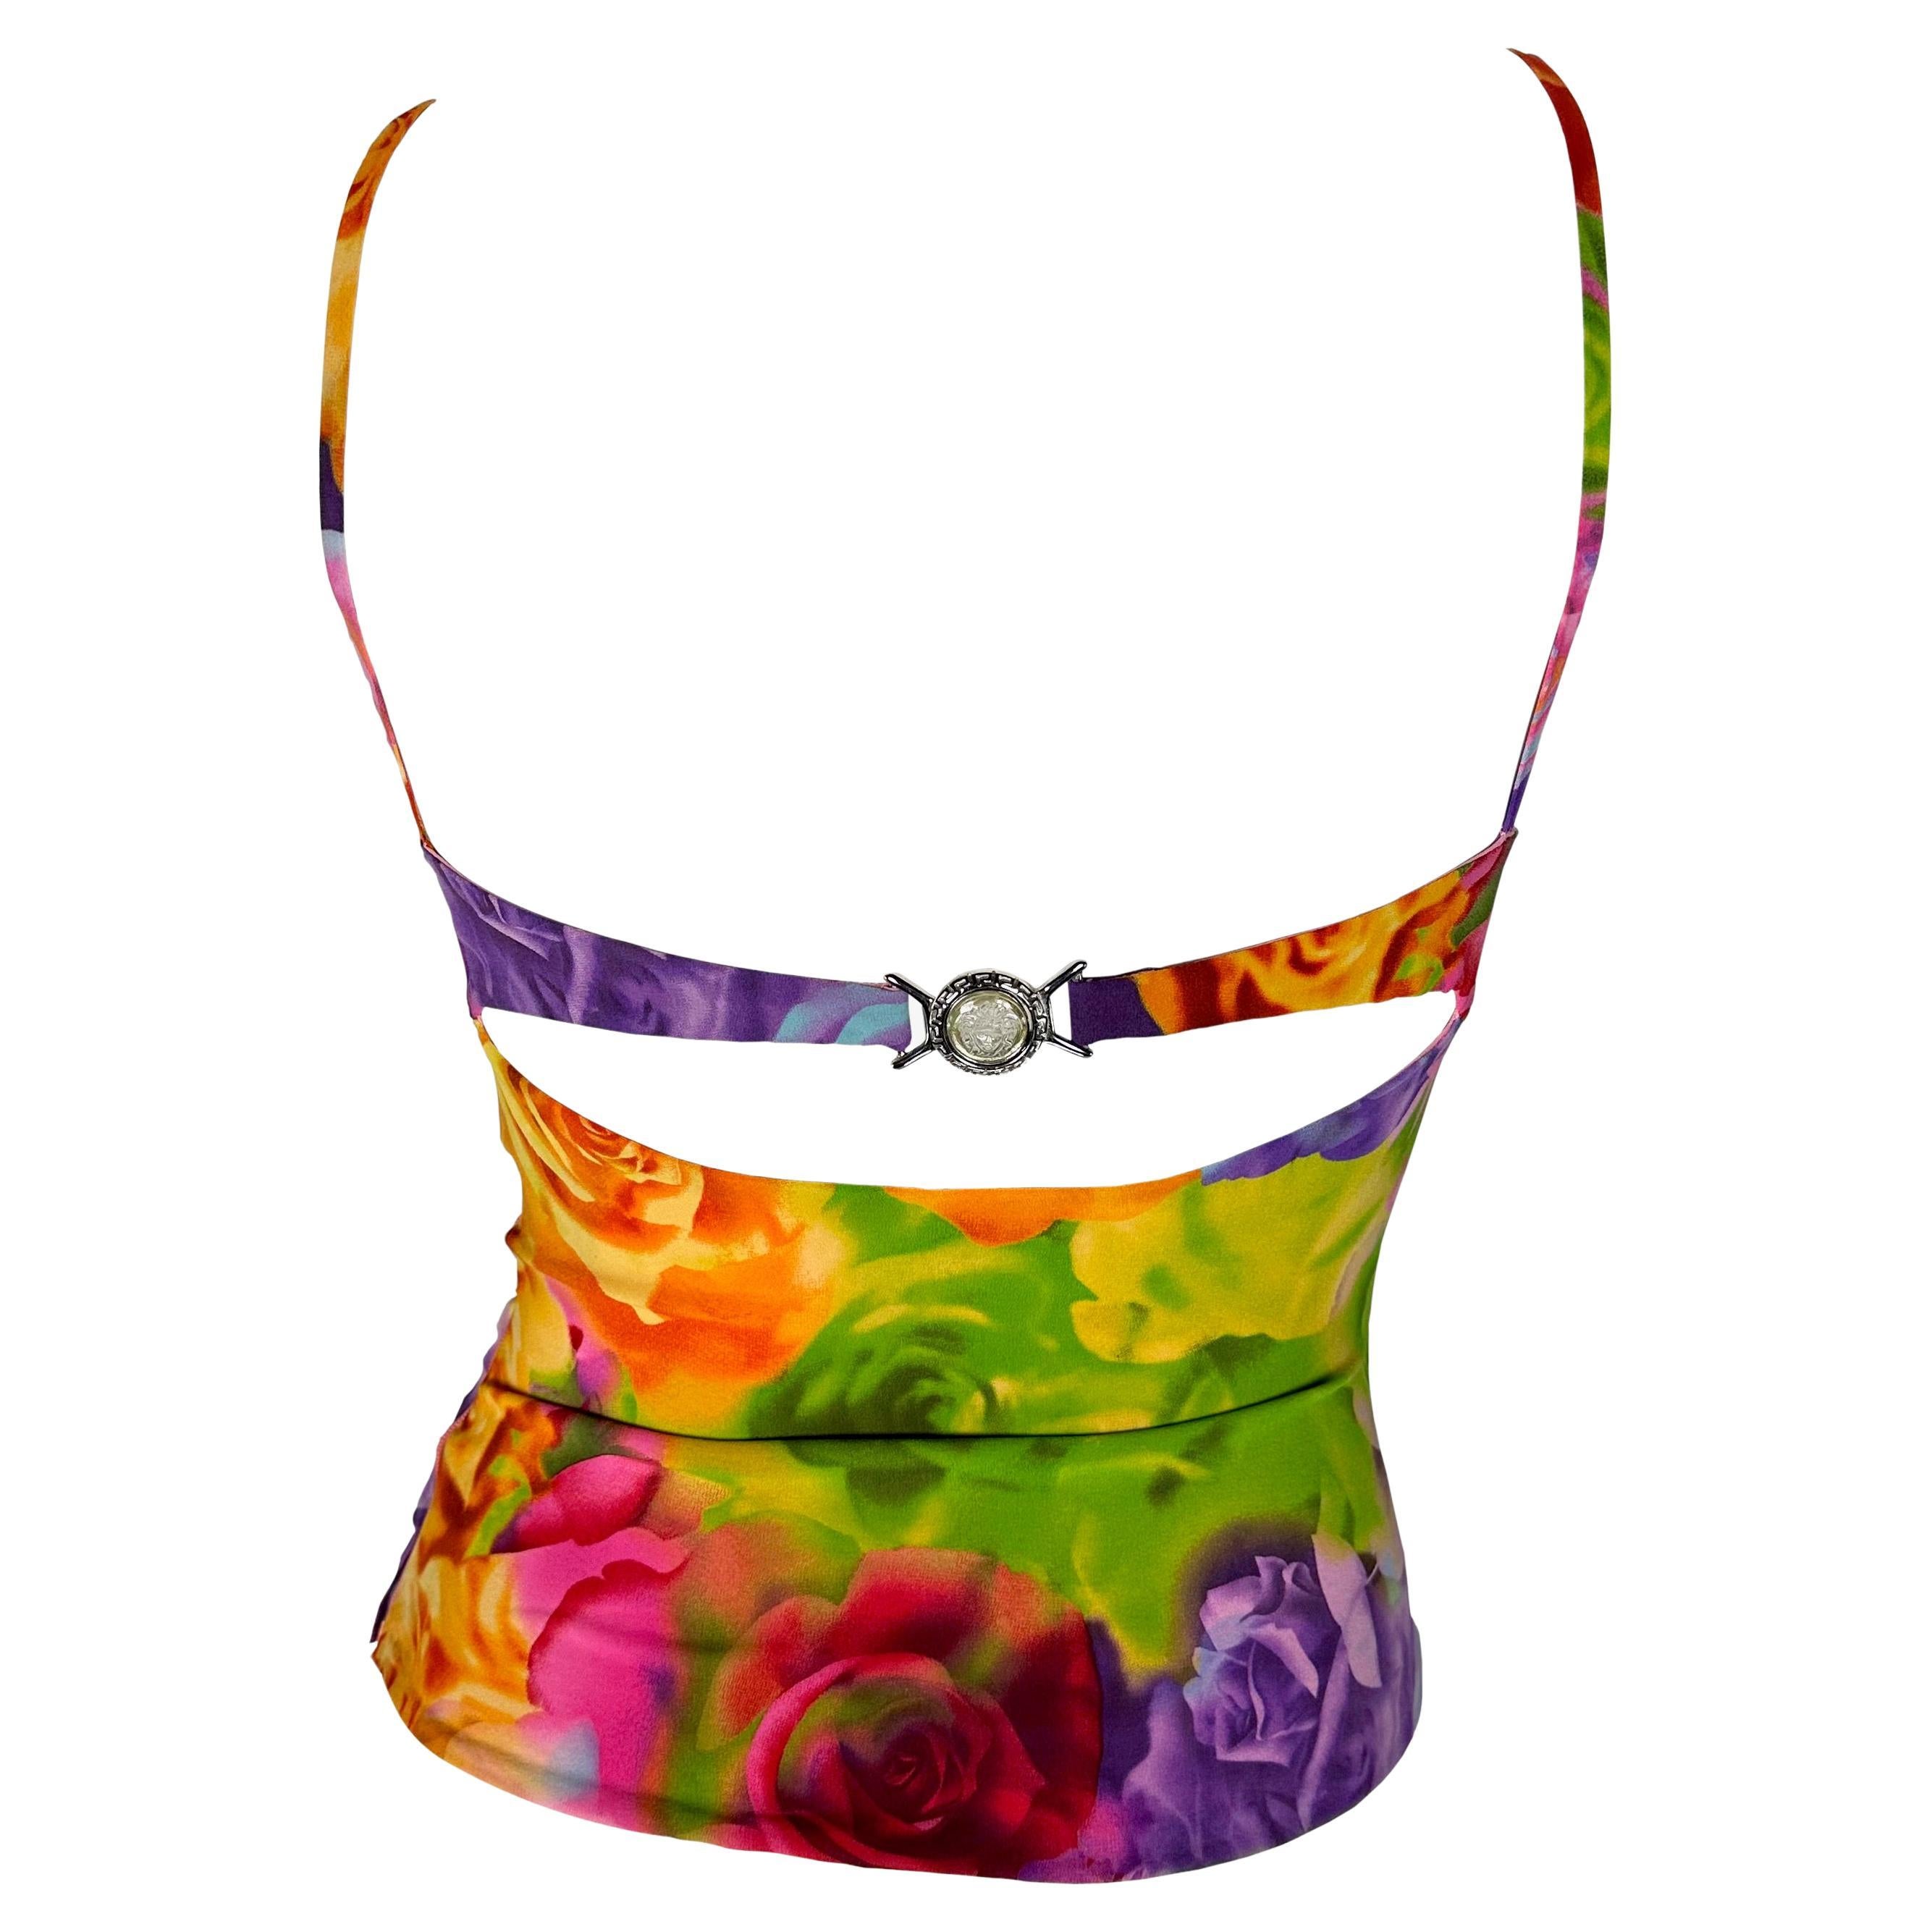 Presenting a bright floral Versace tank top, designed by Donatella Versace. From the Spring/Summer 2004 collection, this vibrant top is covered in a multicolored floral rose print. The top features spaghetti straps, a semi-sweetheart neckline with a